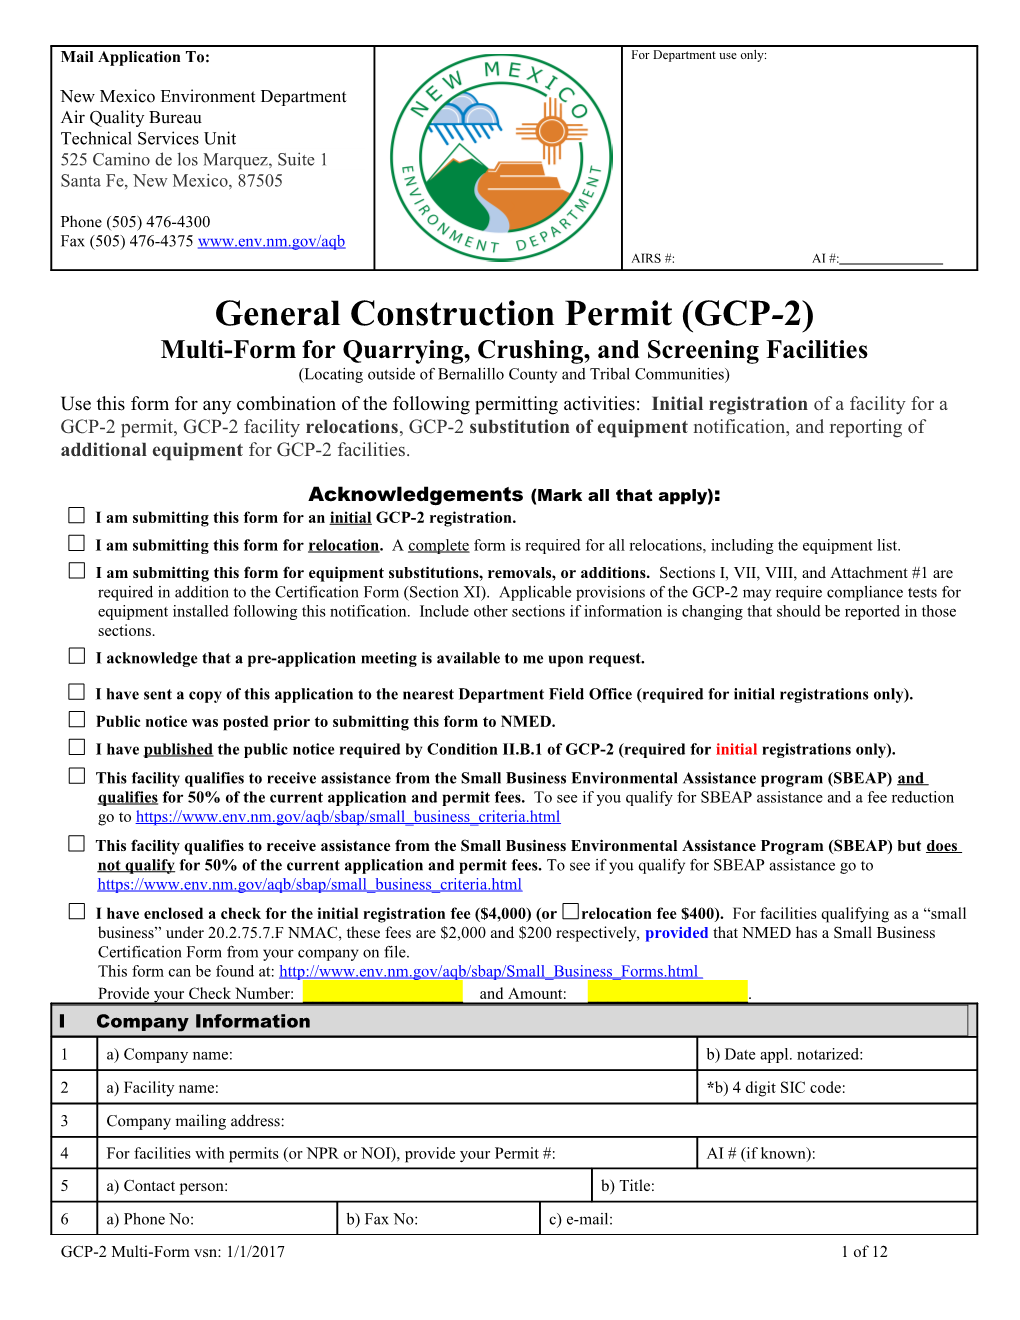 I Am Submitting This Form for an Initial GCP-2 Registration